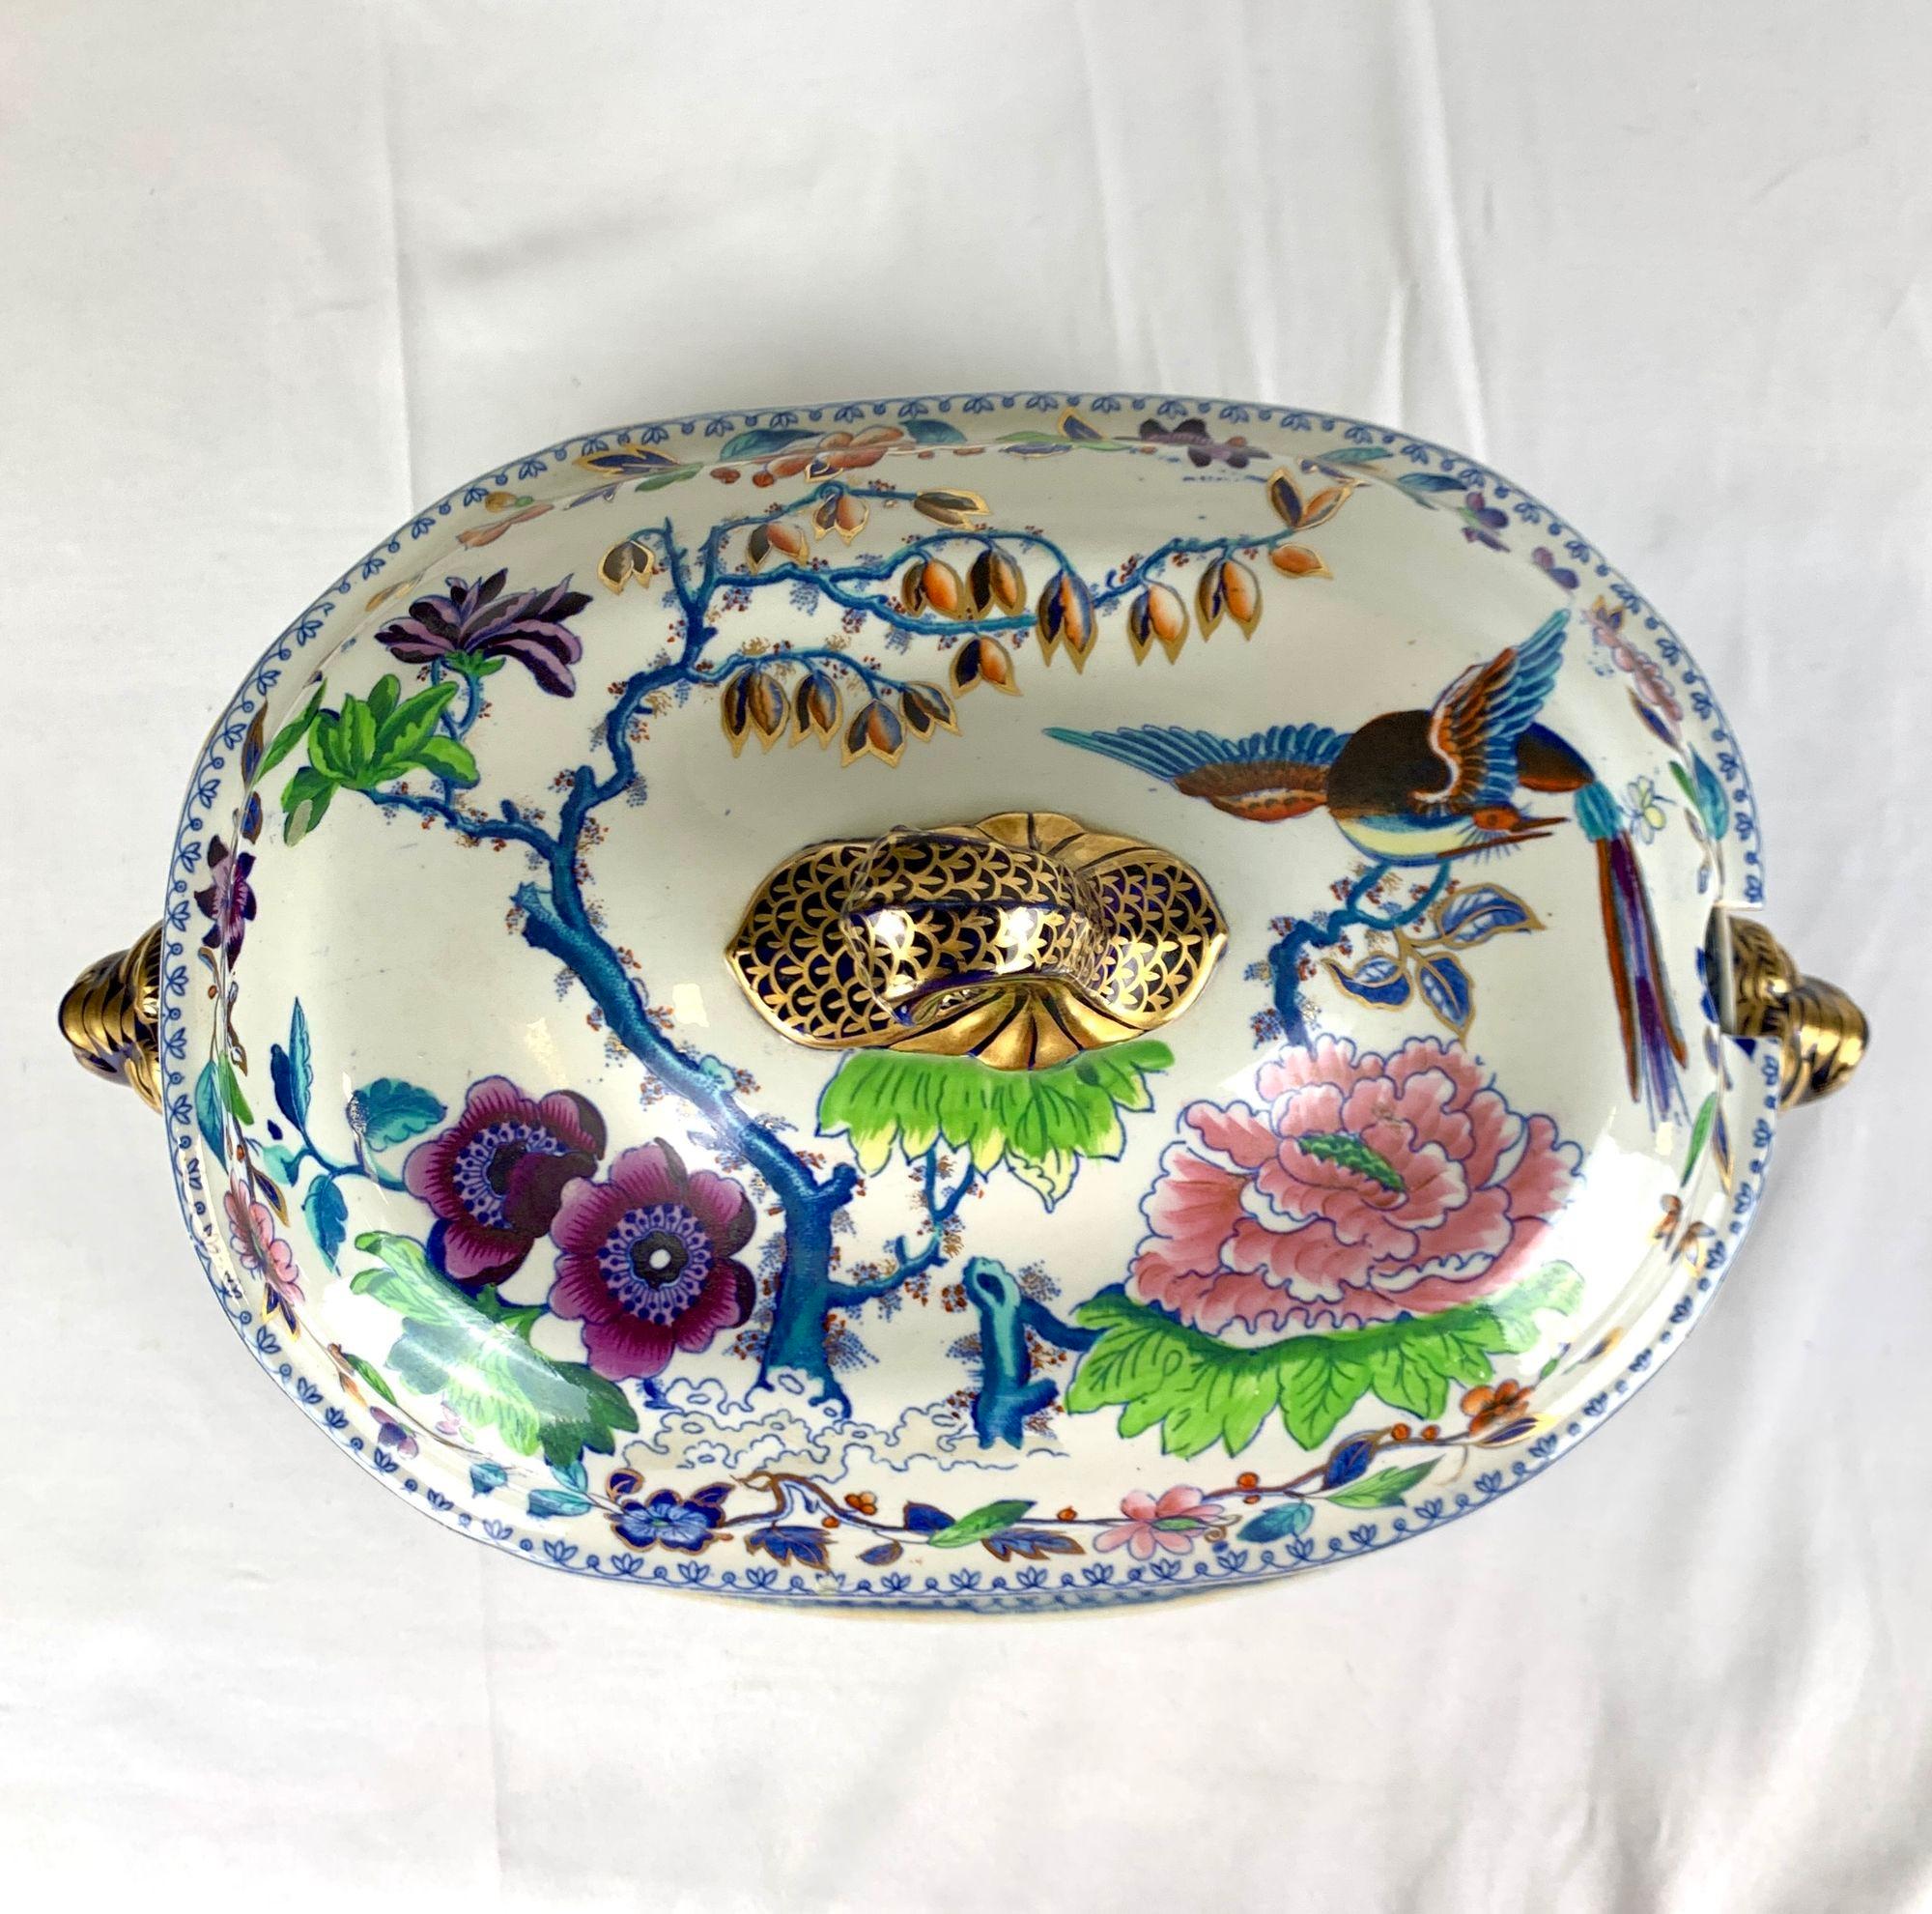 Large Soup Tureen Flying Bird Pattern Made in England Circa 1815 by Davenport 4